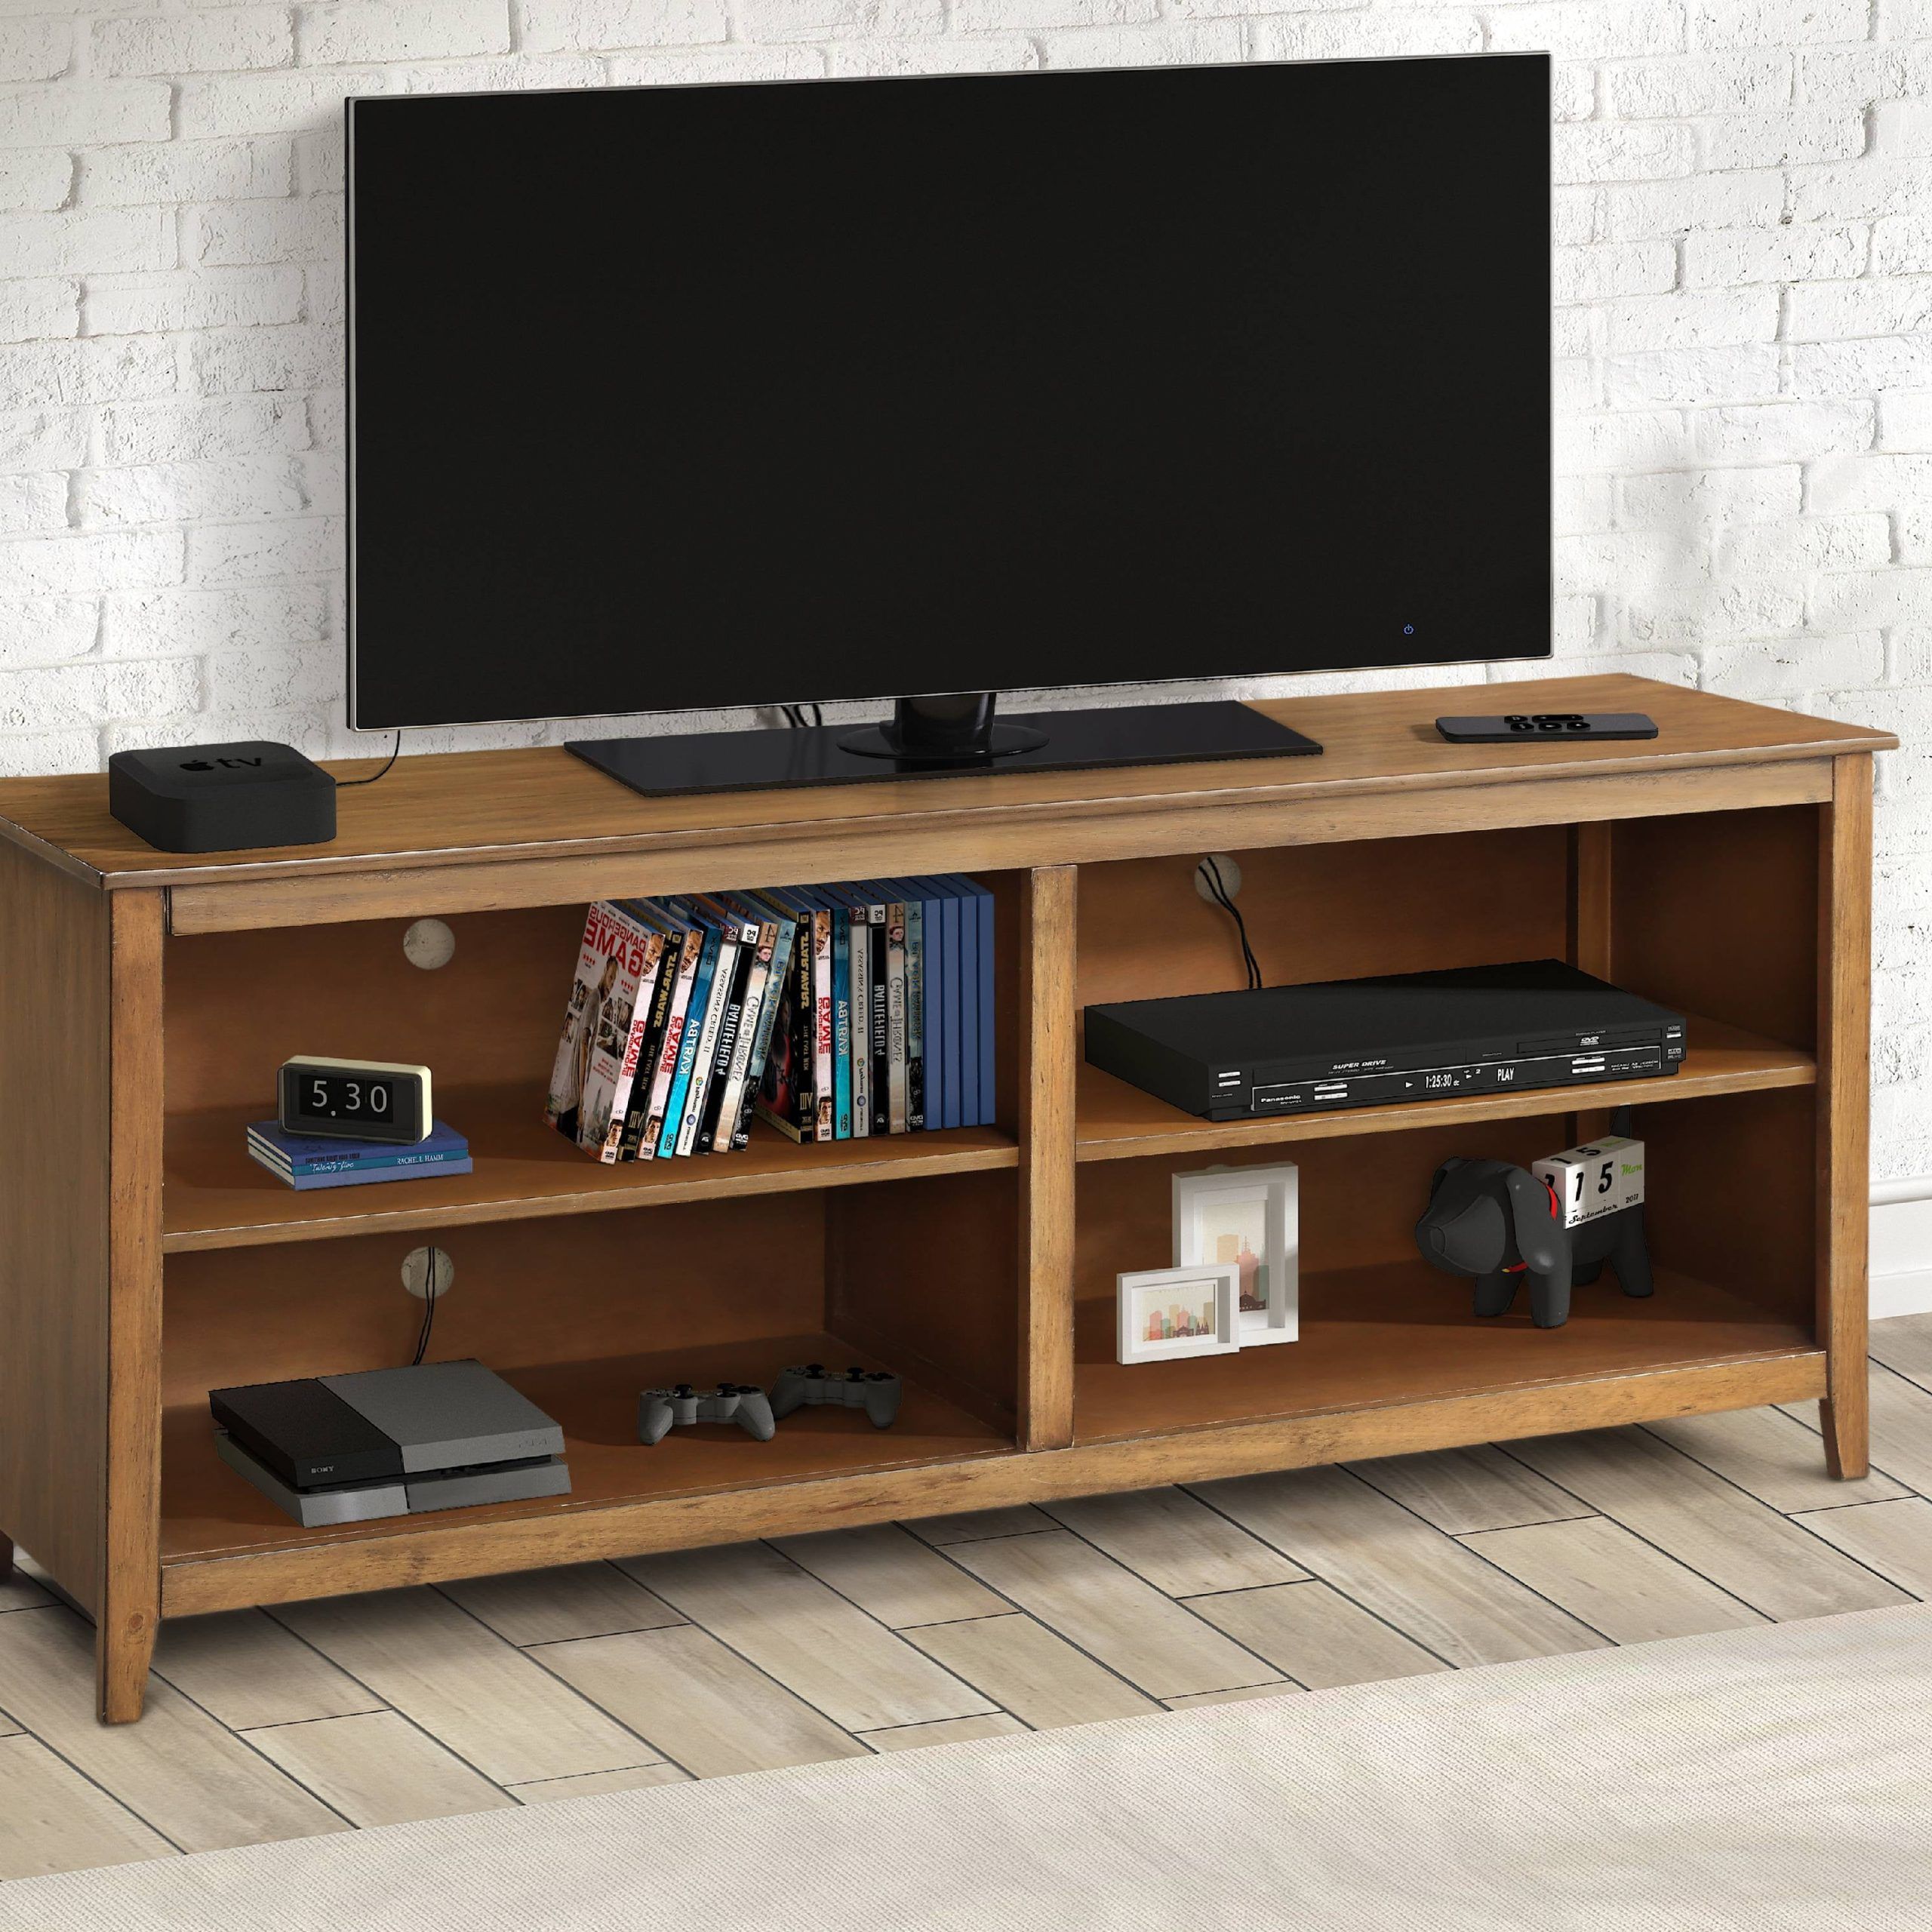 Harper & Bright Designs Wood Tv Stand With Storage For Tv Up To 60 With Regard To Cafe Tv Stands With Storage (Gallery 12 of 20)